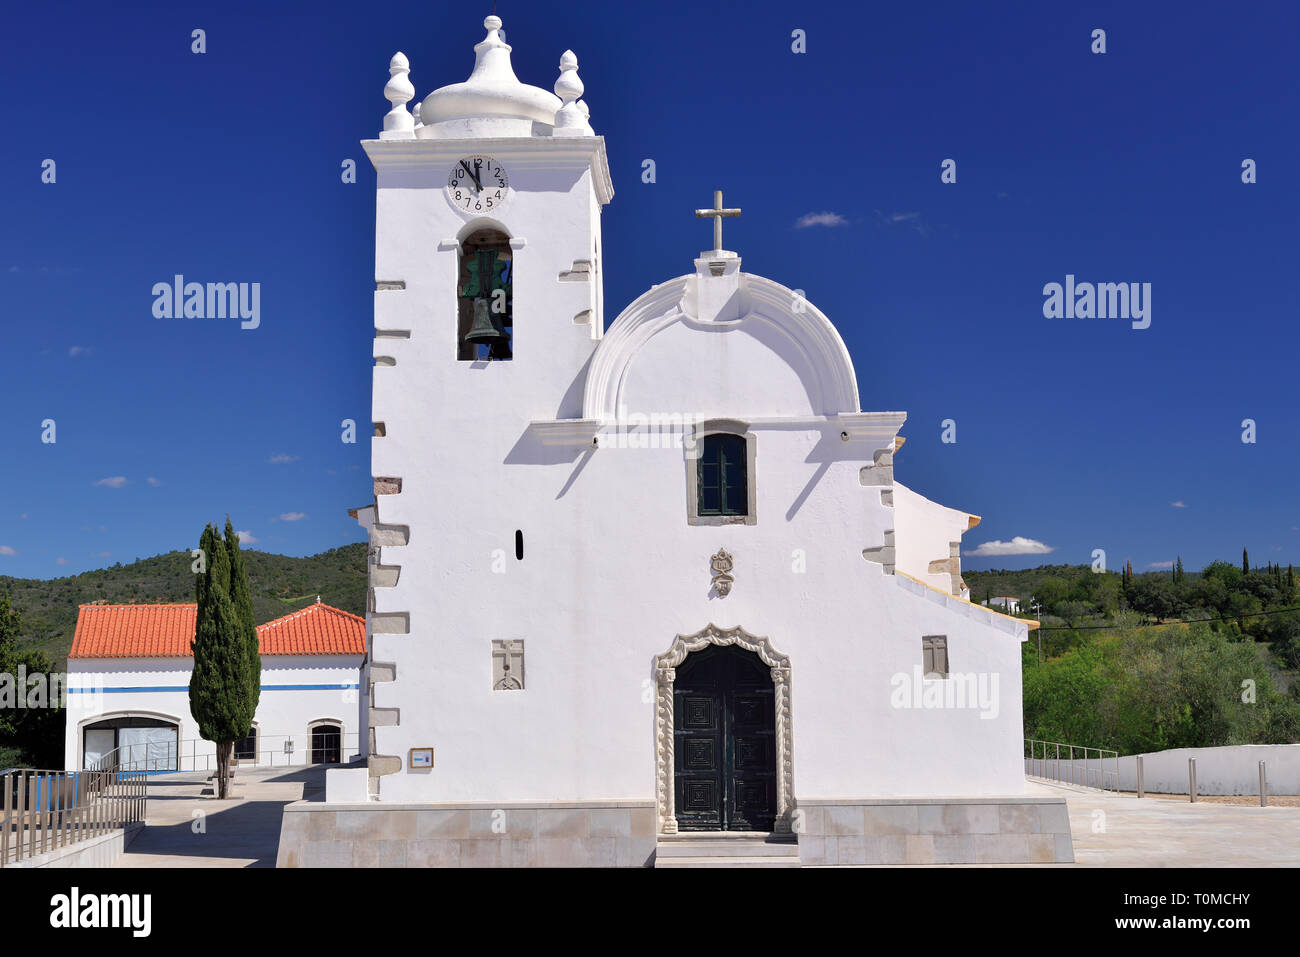 White washed medieval church contrasting with babyblue sky on a sunny day Stock Photo